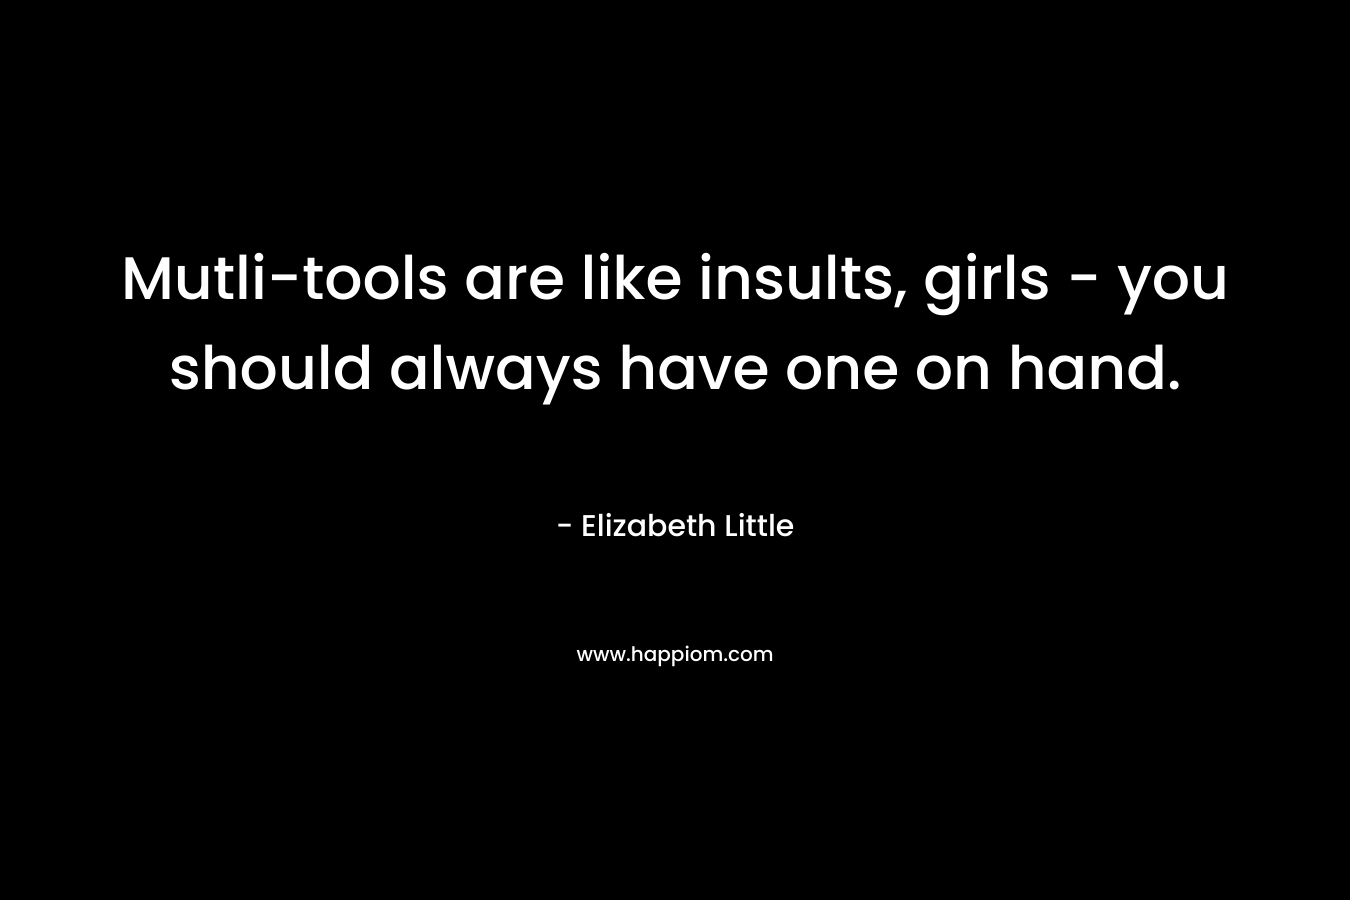 Mutli-tools are like insults, girls – you should always have one on hand. – Elizabeth Little